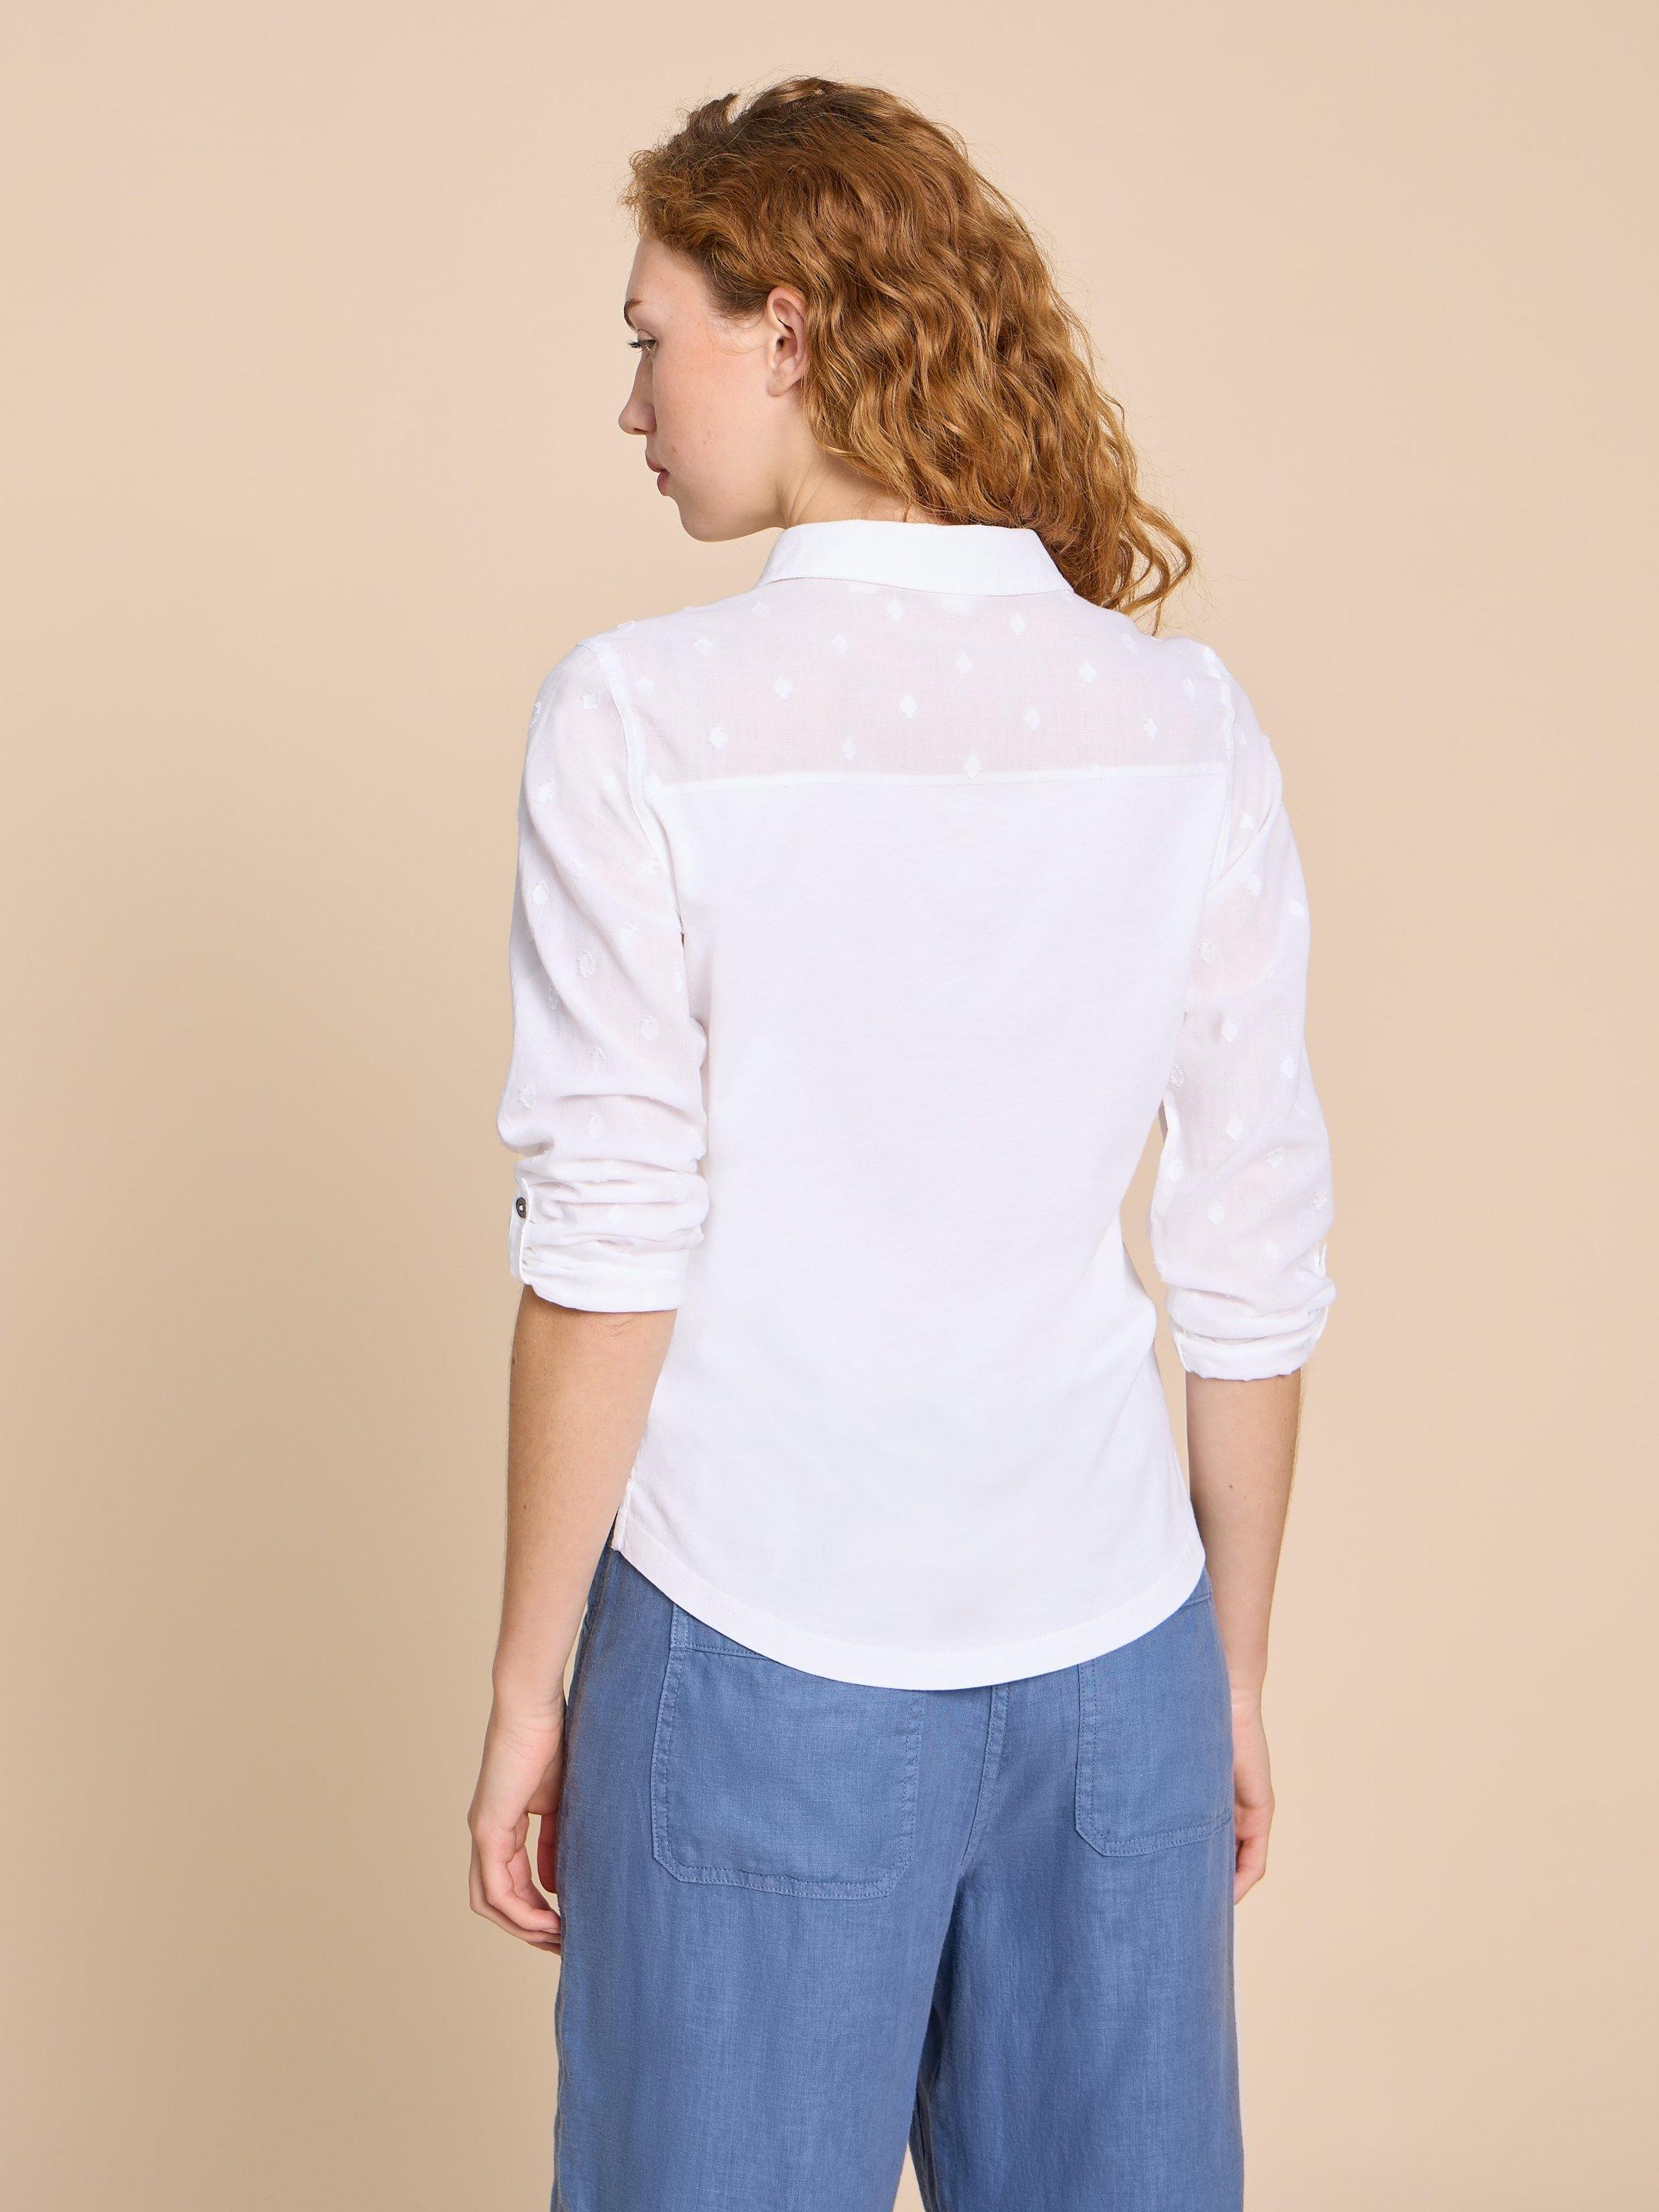 ANNIE MIX JERSEY SHIRT in PALE IVORY - MODEL BACK